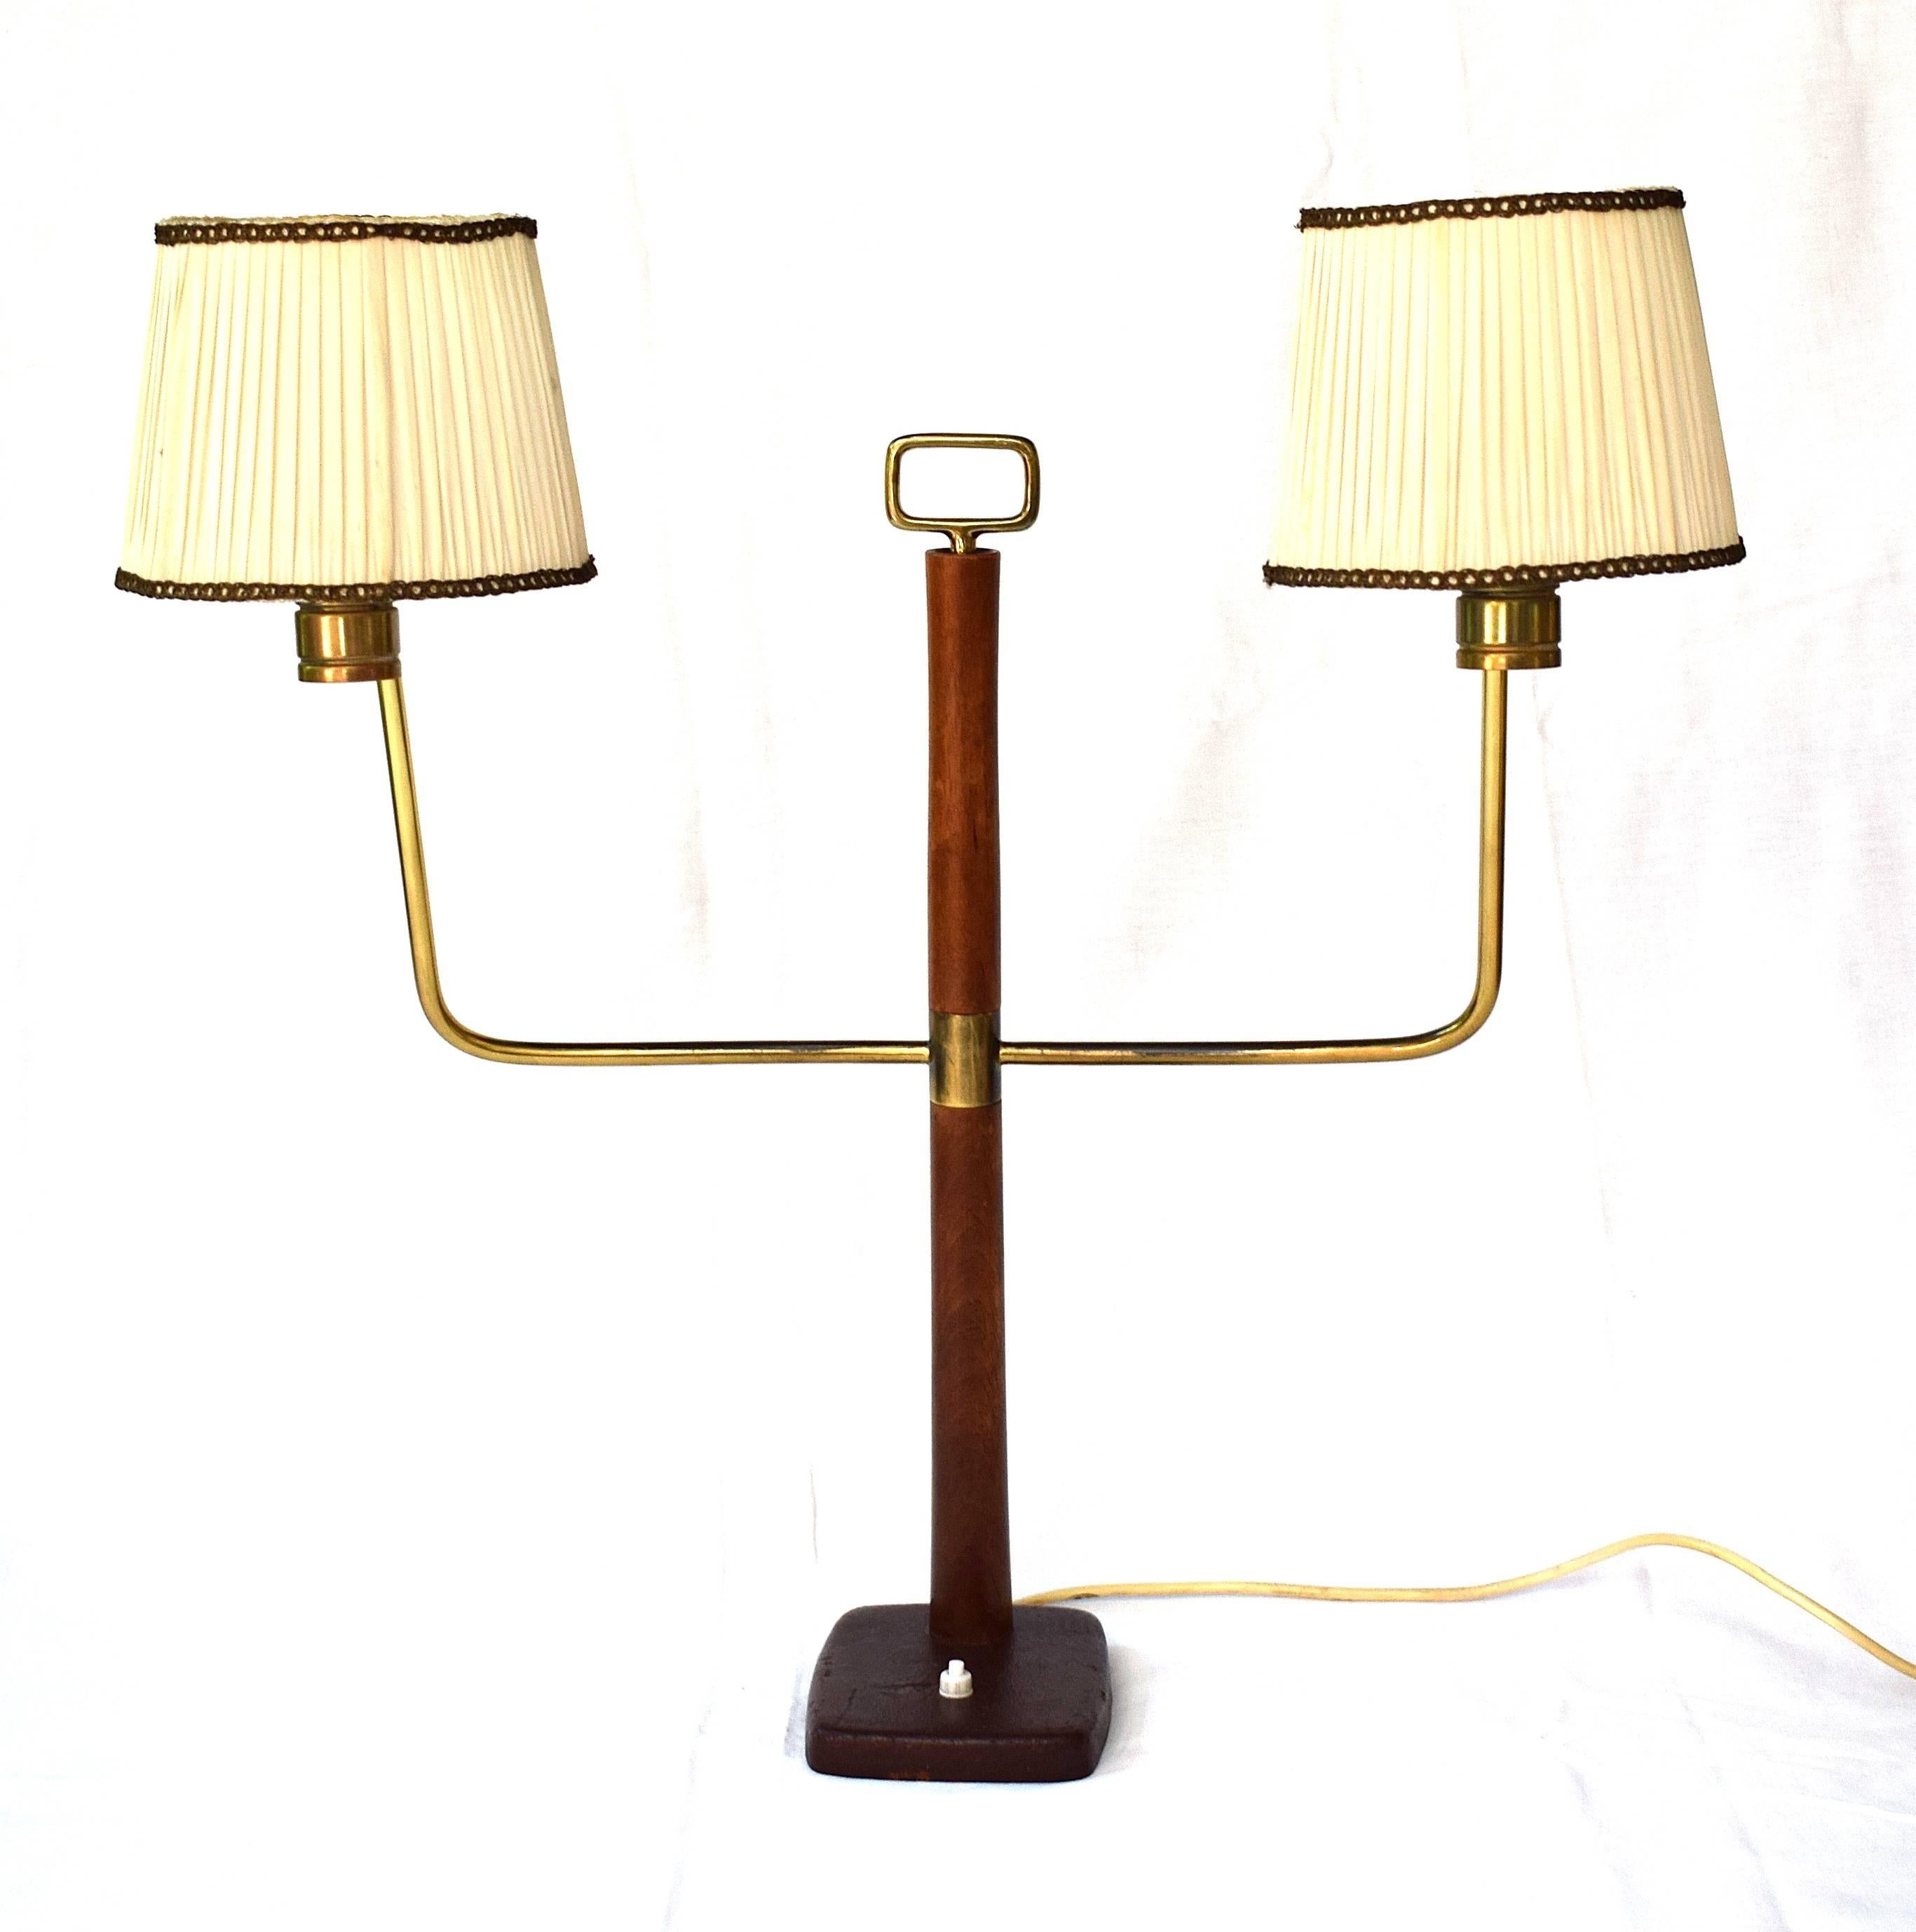 Large Table Lamp by Josef Frank for J.T. Kalmar, 1930s For Sale 1